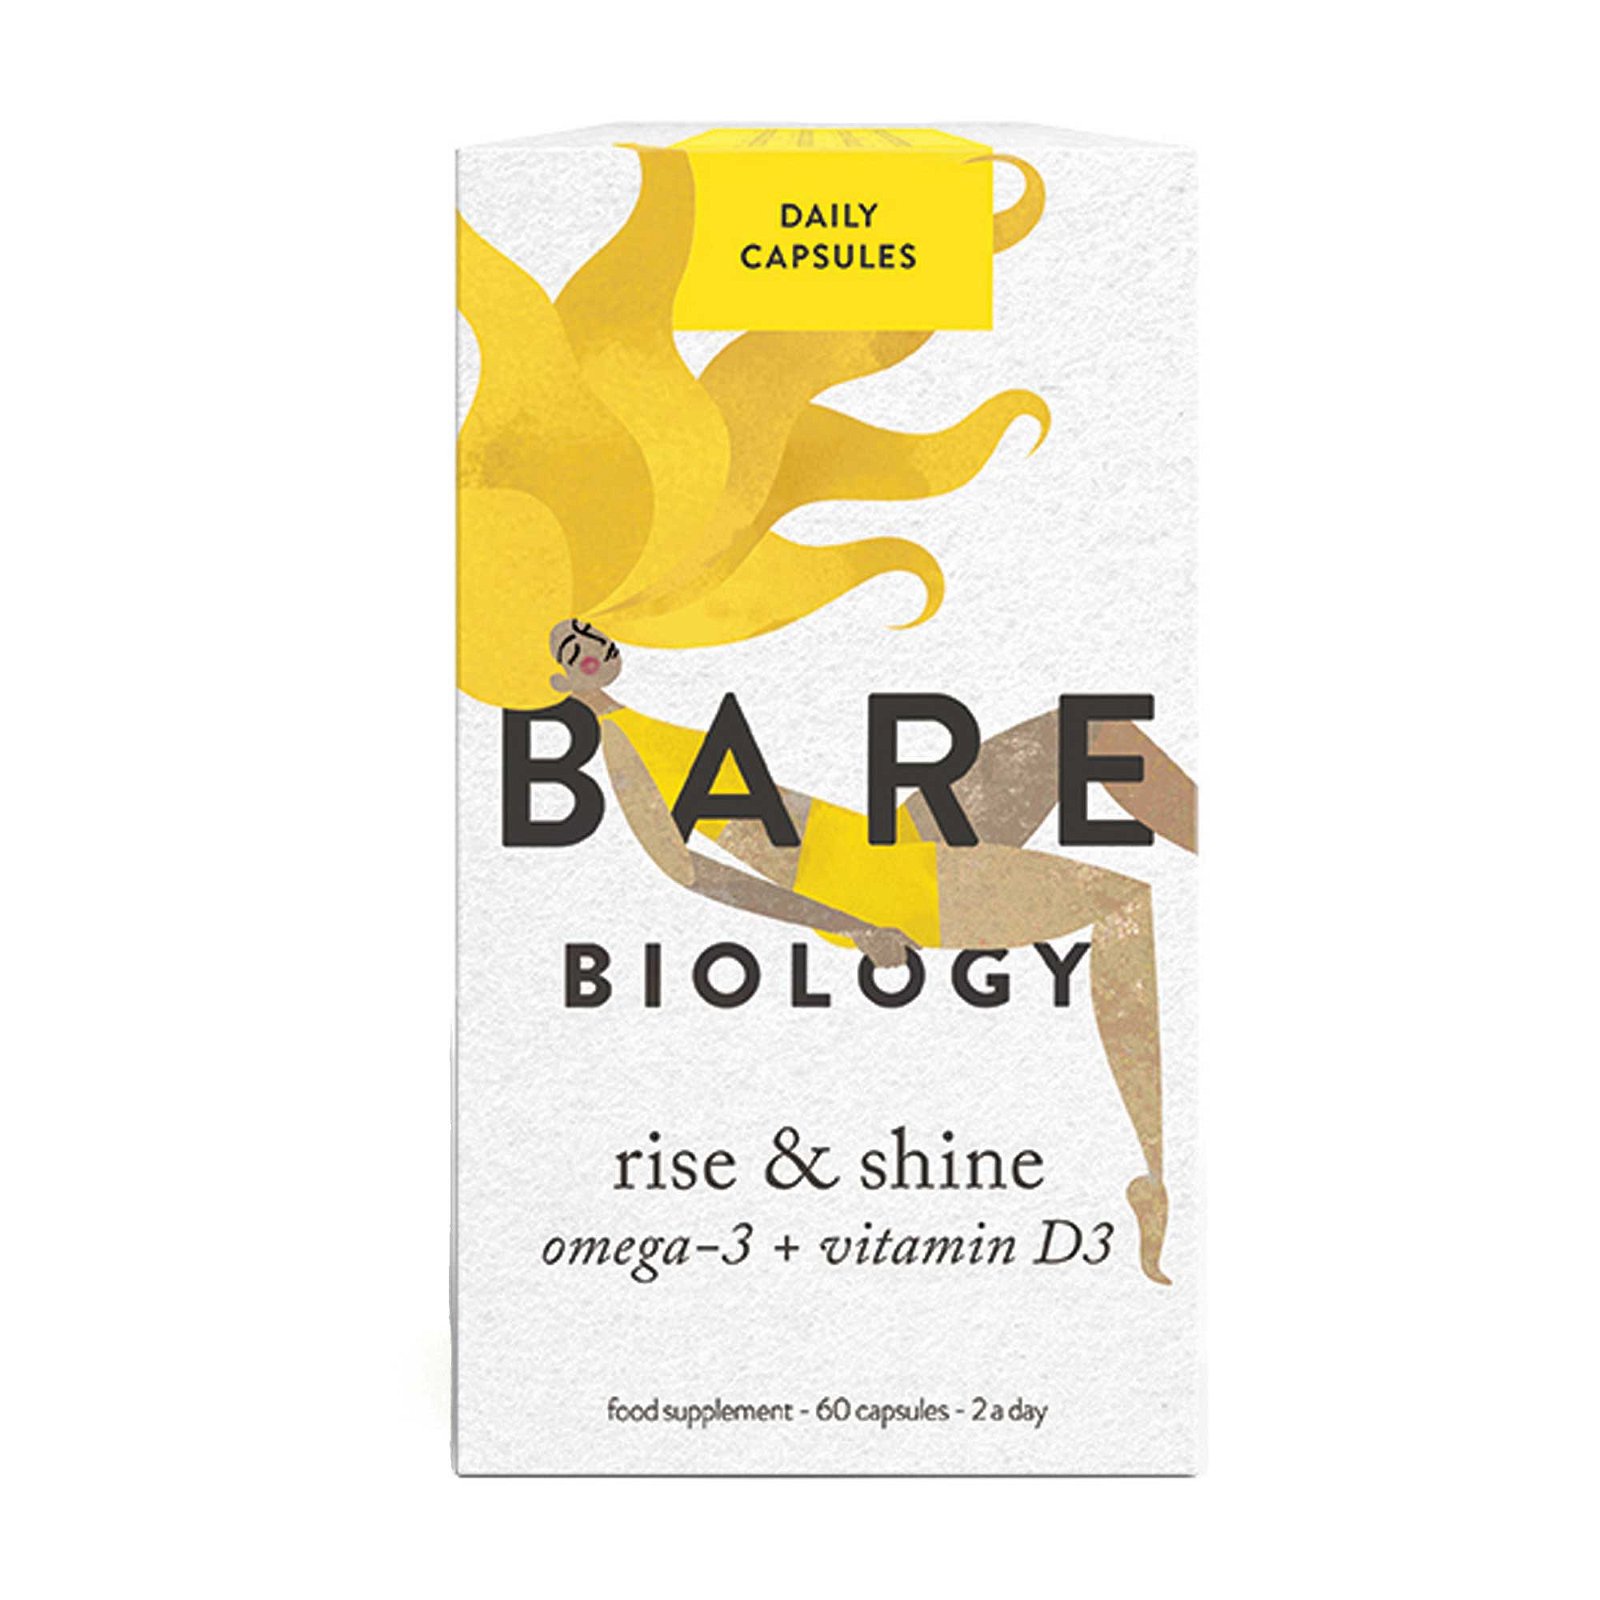 15% off Essential Fats Bare Biology